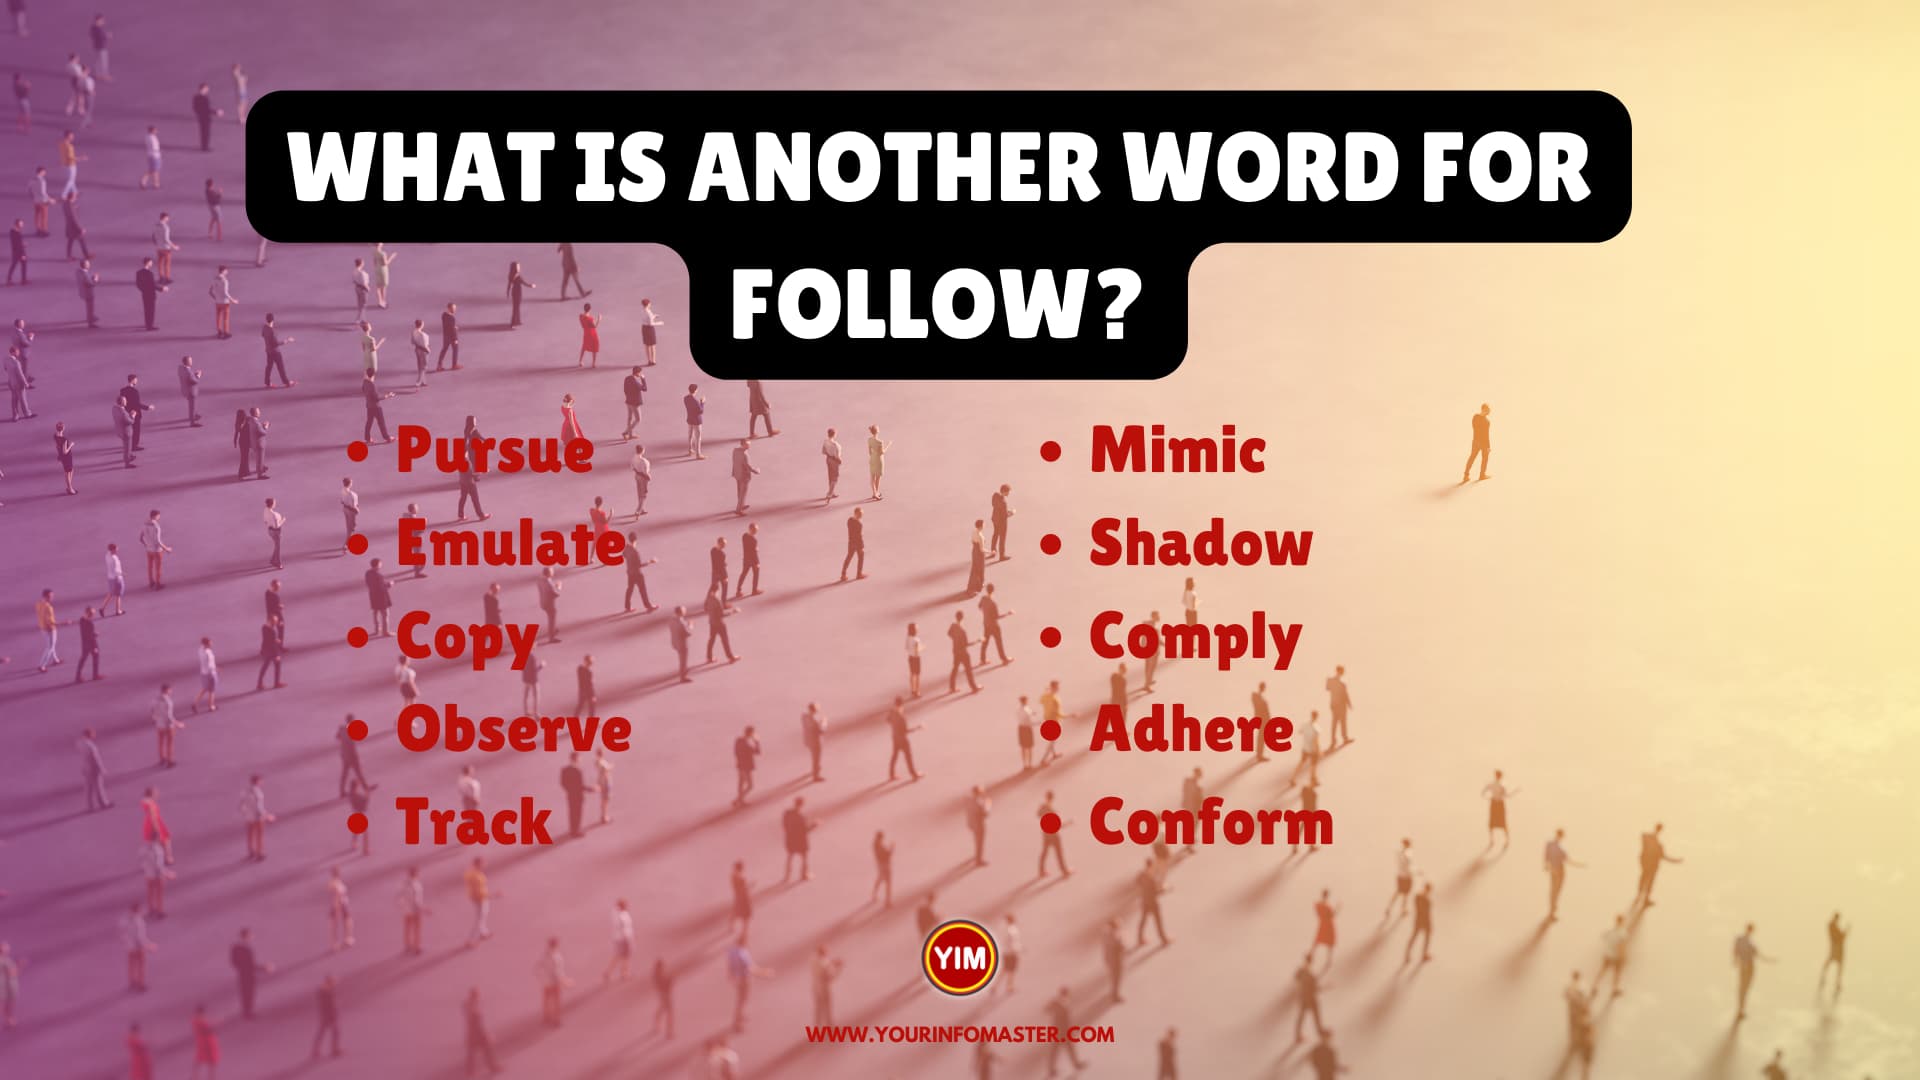 What is another word for Follow